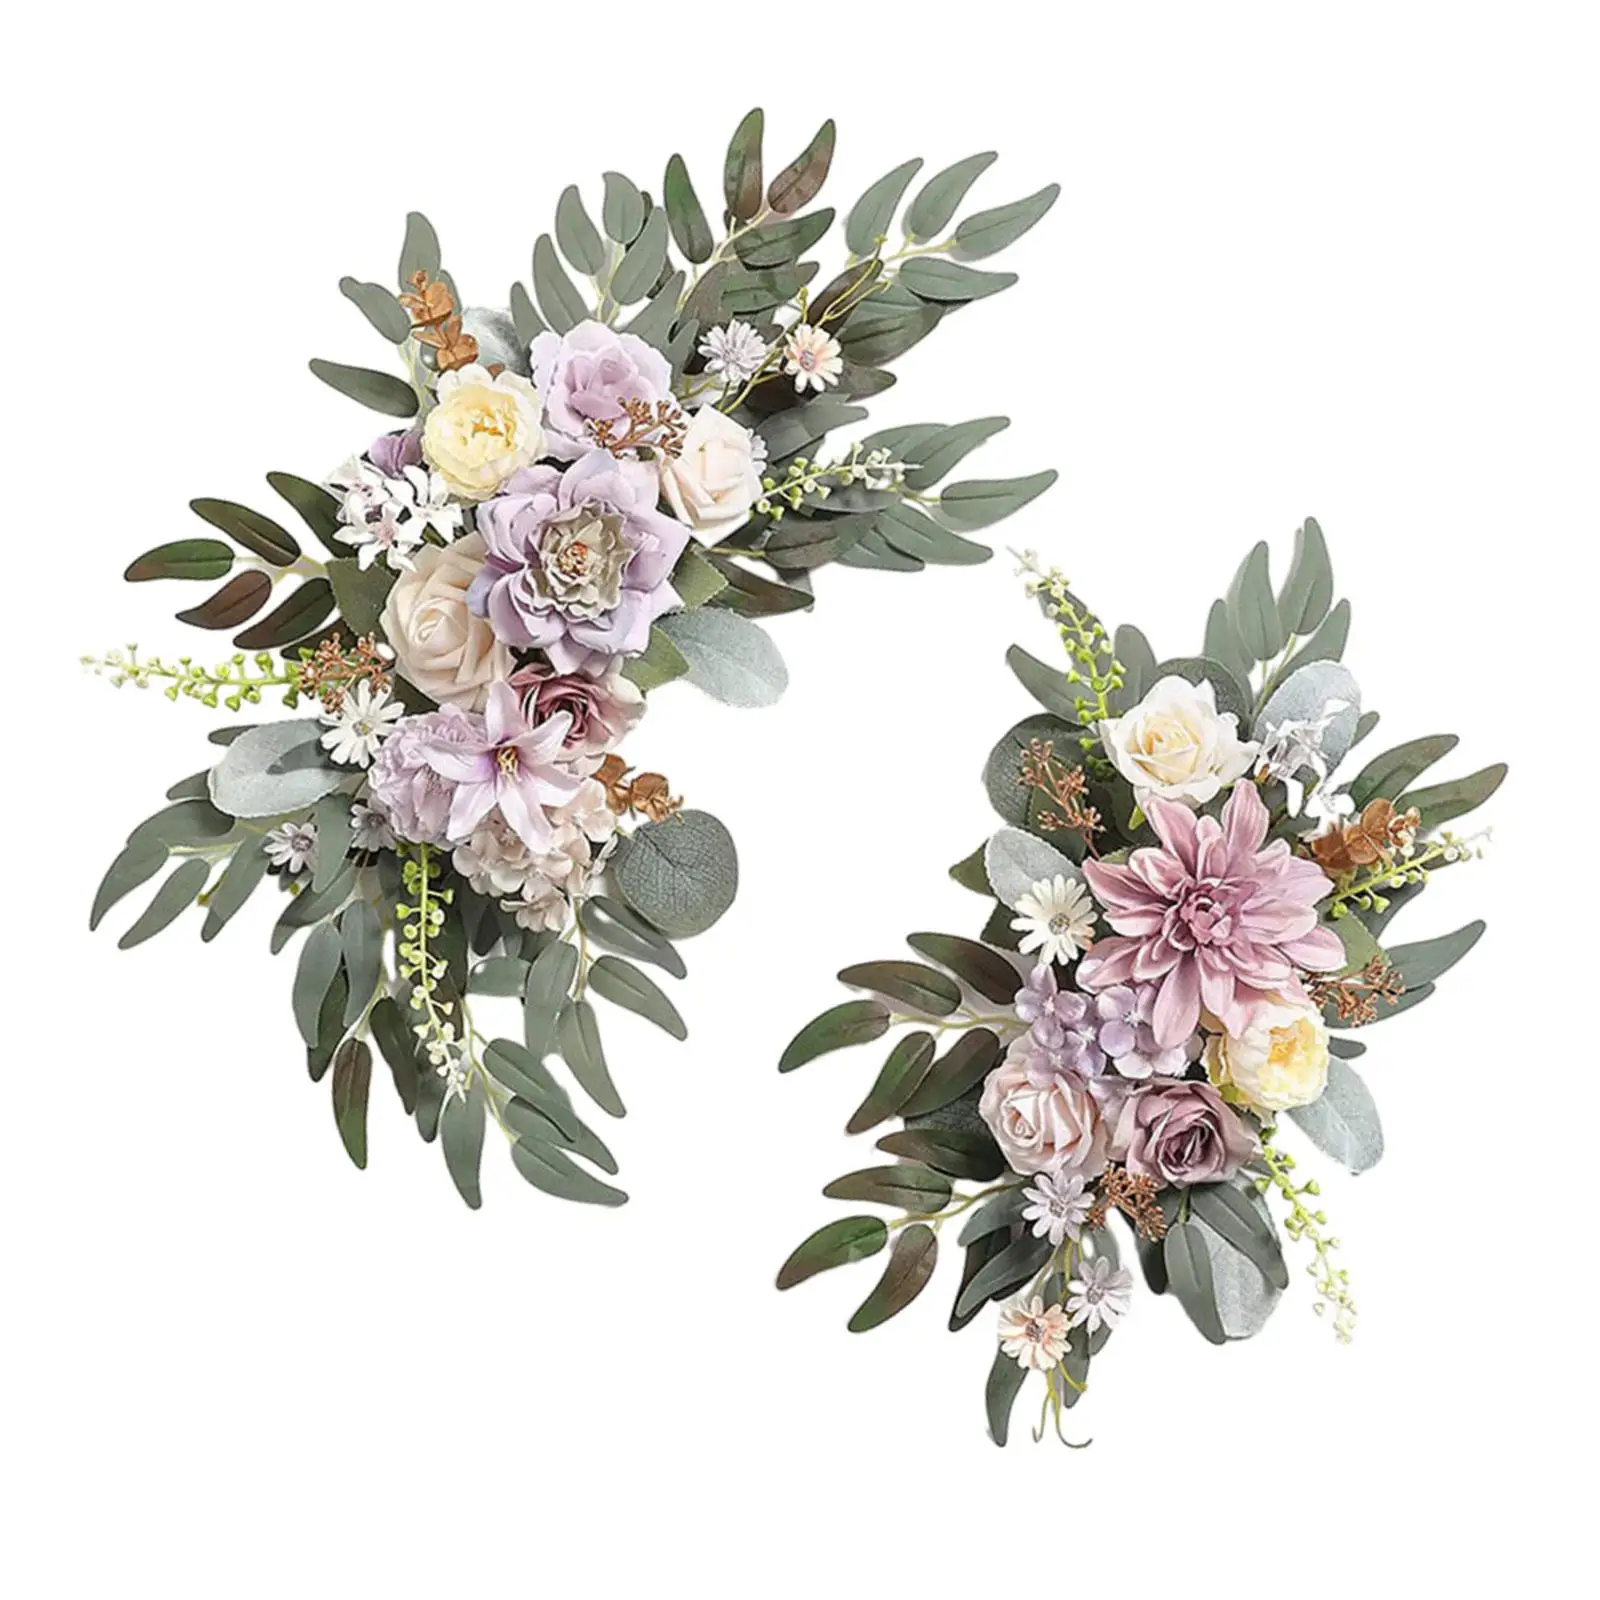 2 Pieces Wedding Arch Wreath Floral Swag Backdrop Handmade Hanging Silk Flowers for Front Door Decoration Ceremony Ornament Wall